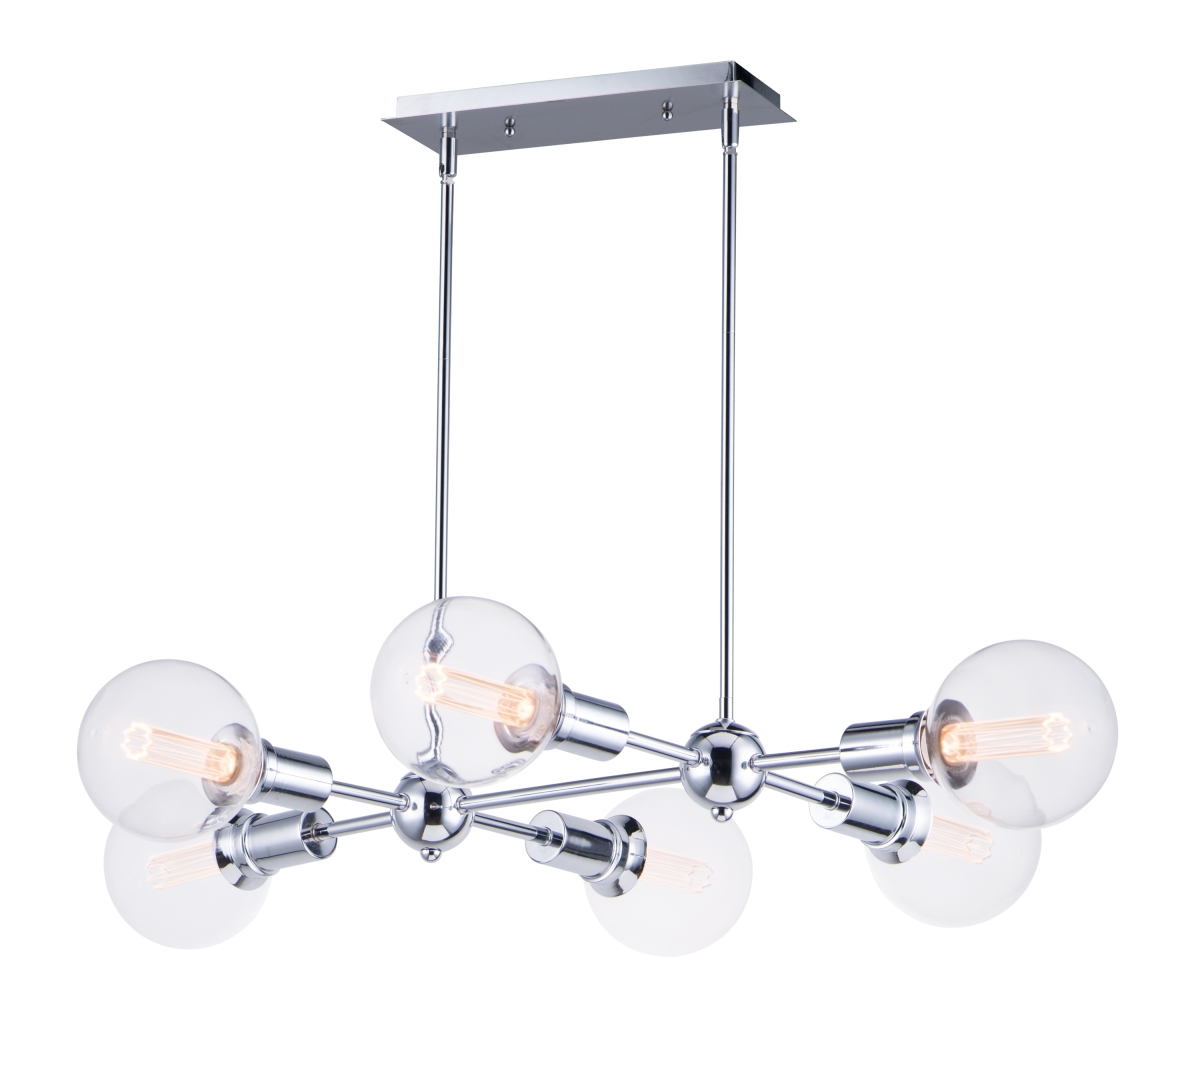 11346pc-bul-g40-cl 35 In. Molecule Six-light Pendant Ceiling With G40 Cl Led Bulb, Polished Chrome